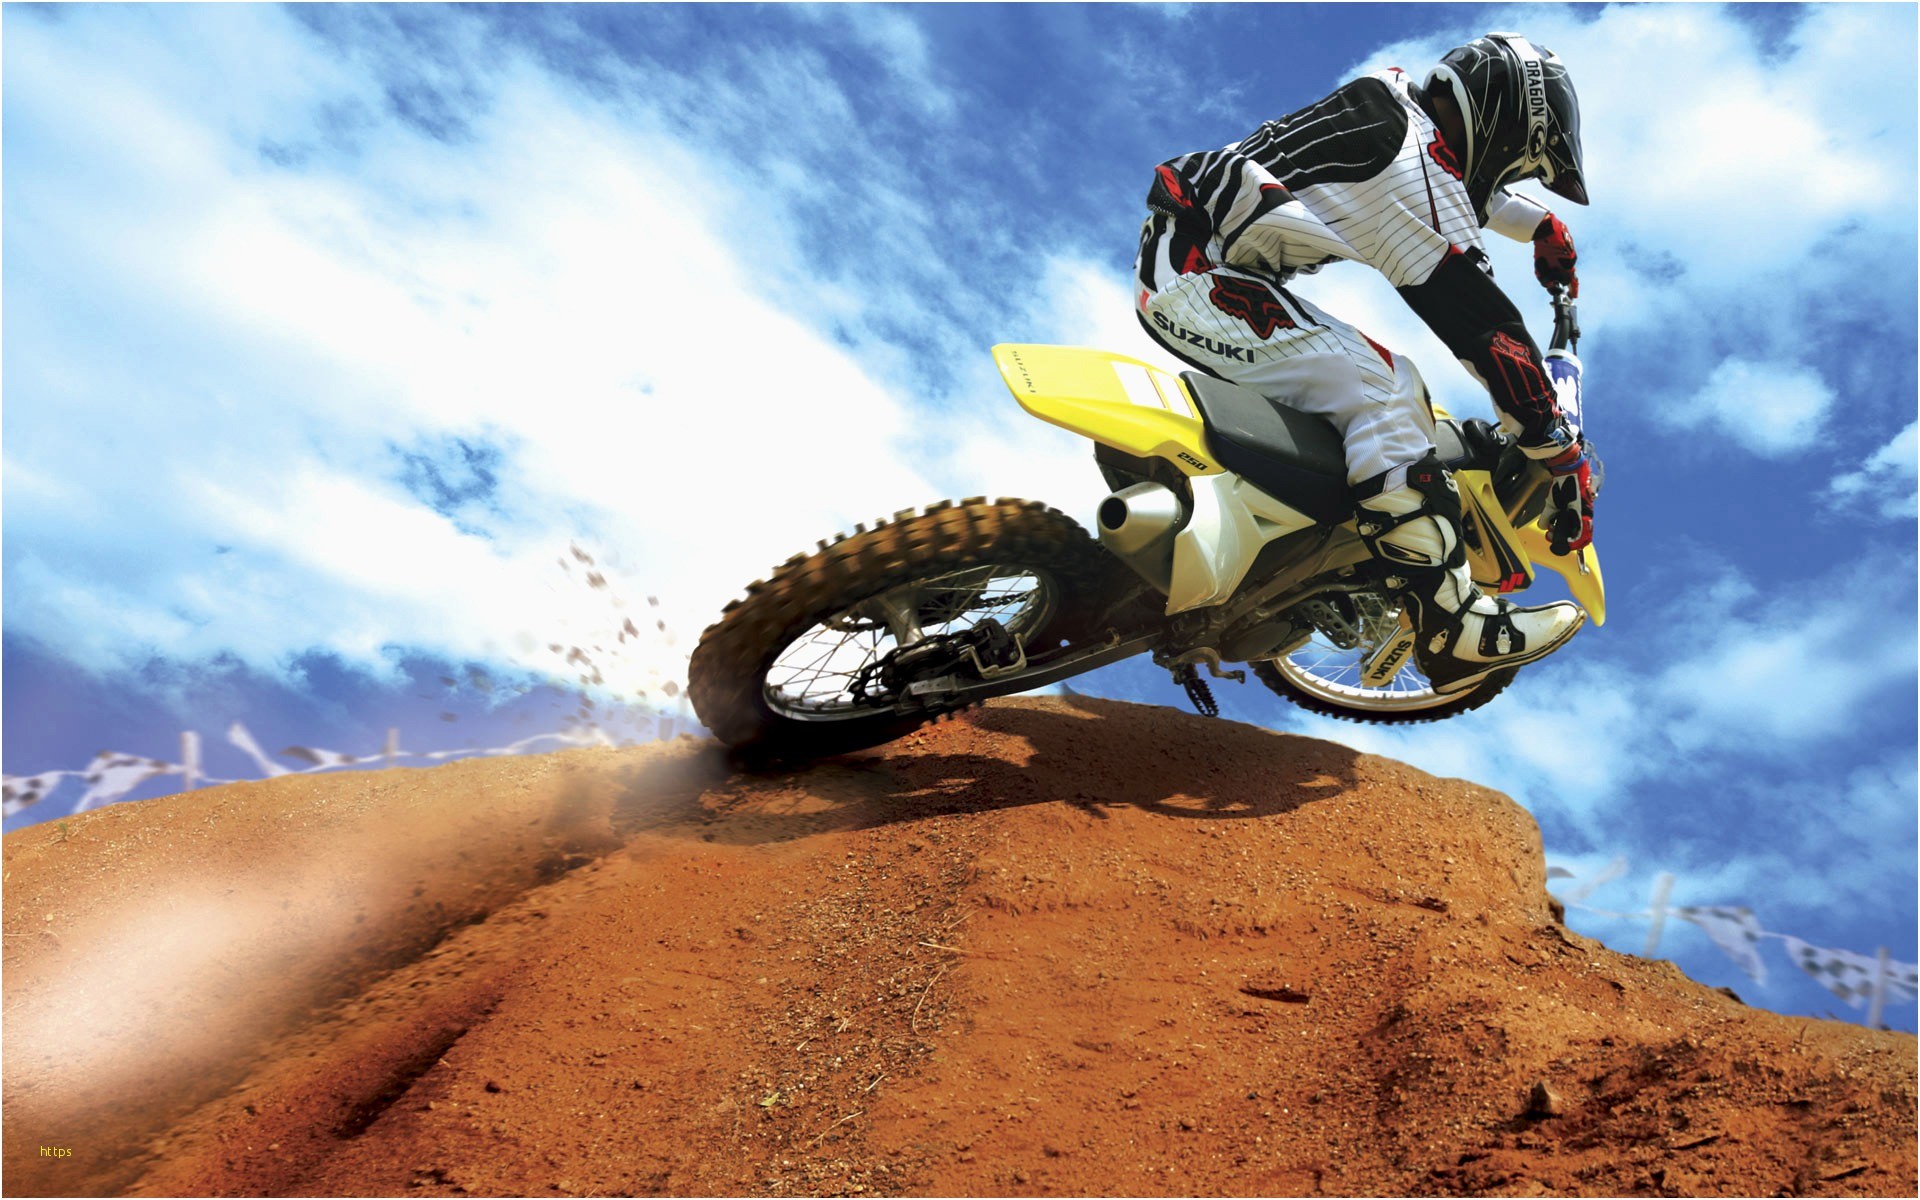 1920x1200 ... Crazy Wallpapers Lovely Crazy Motocross Bike Wallpapers Hd Wallpapers  ...